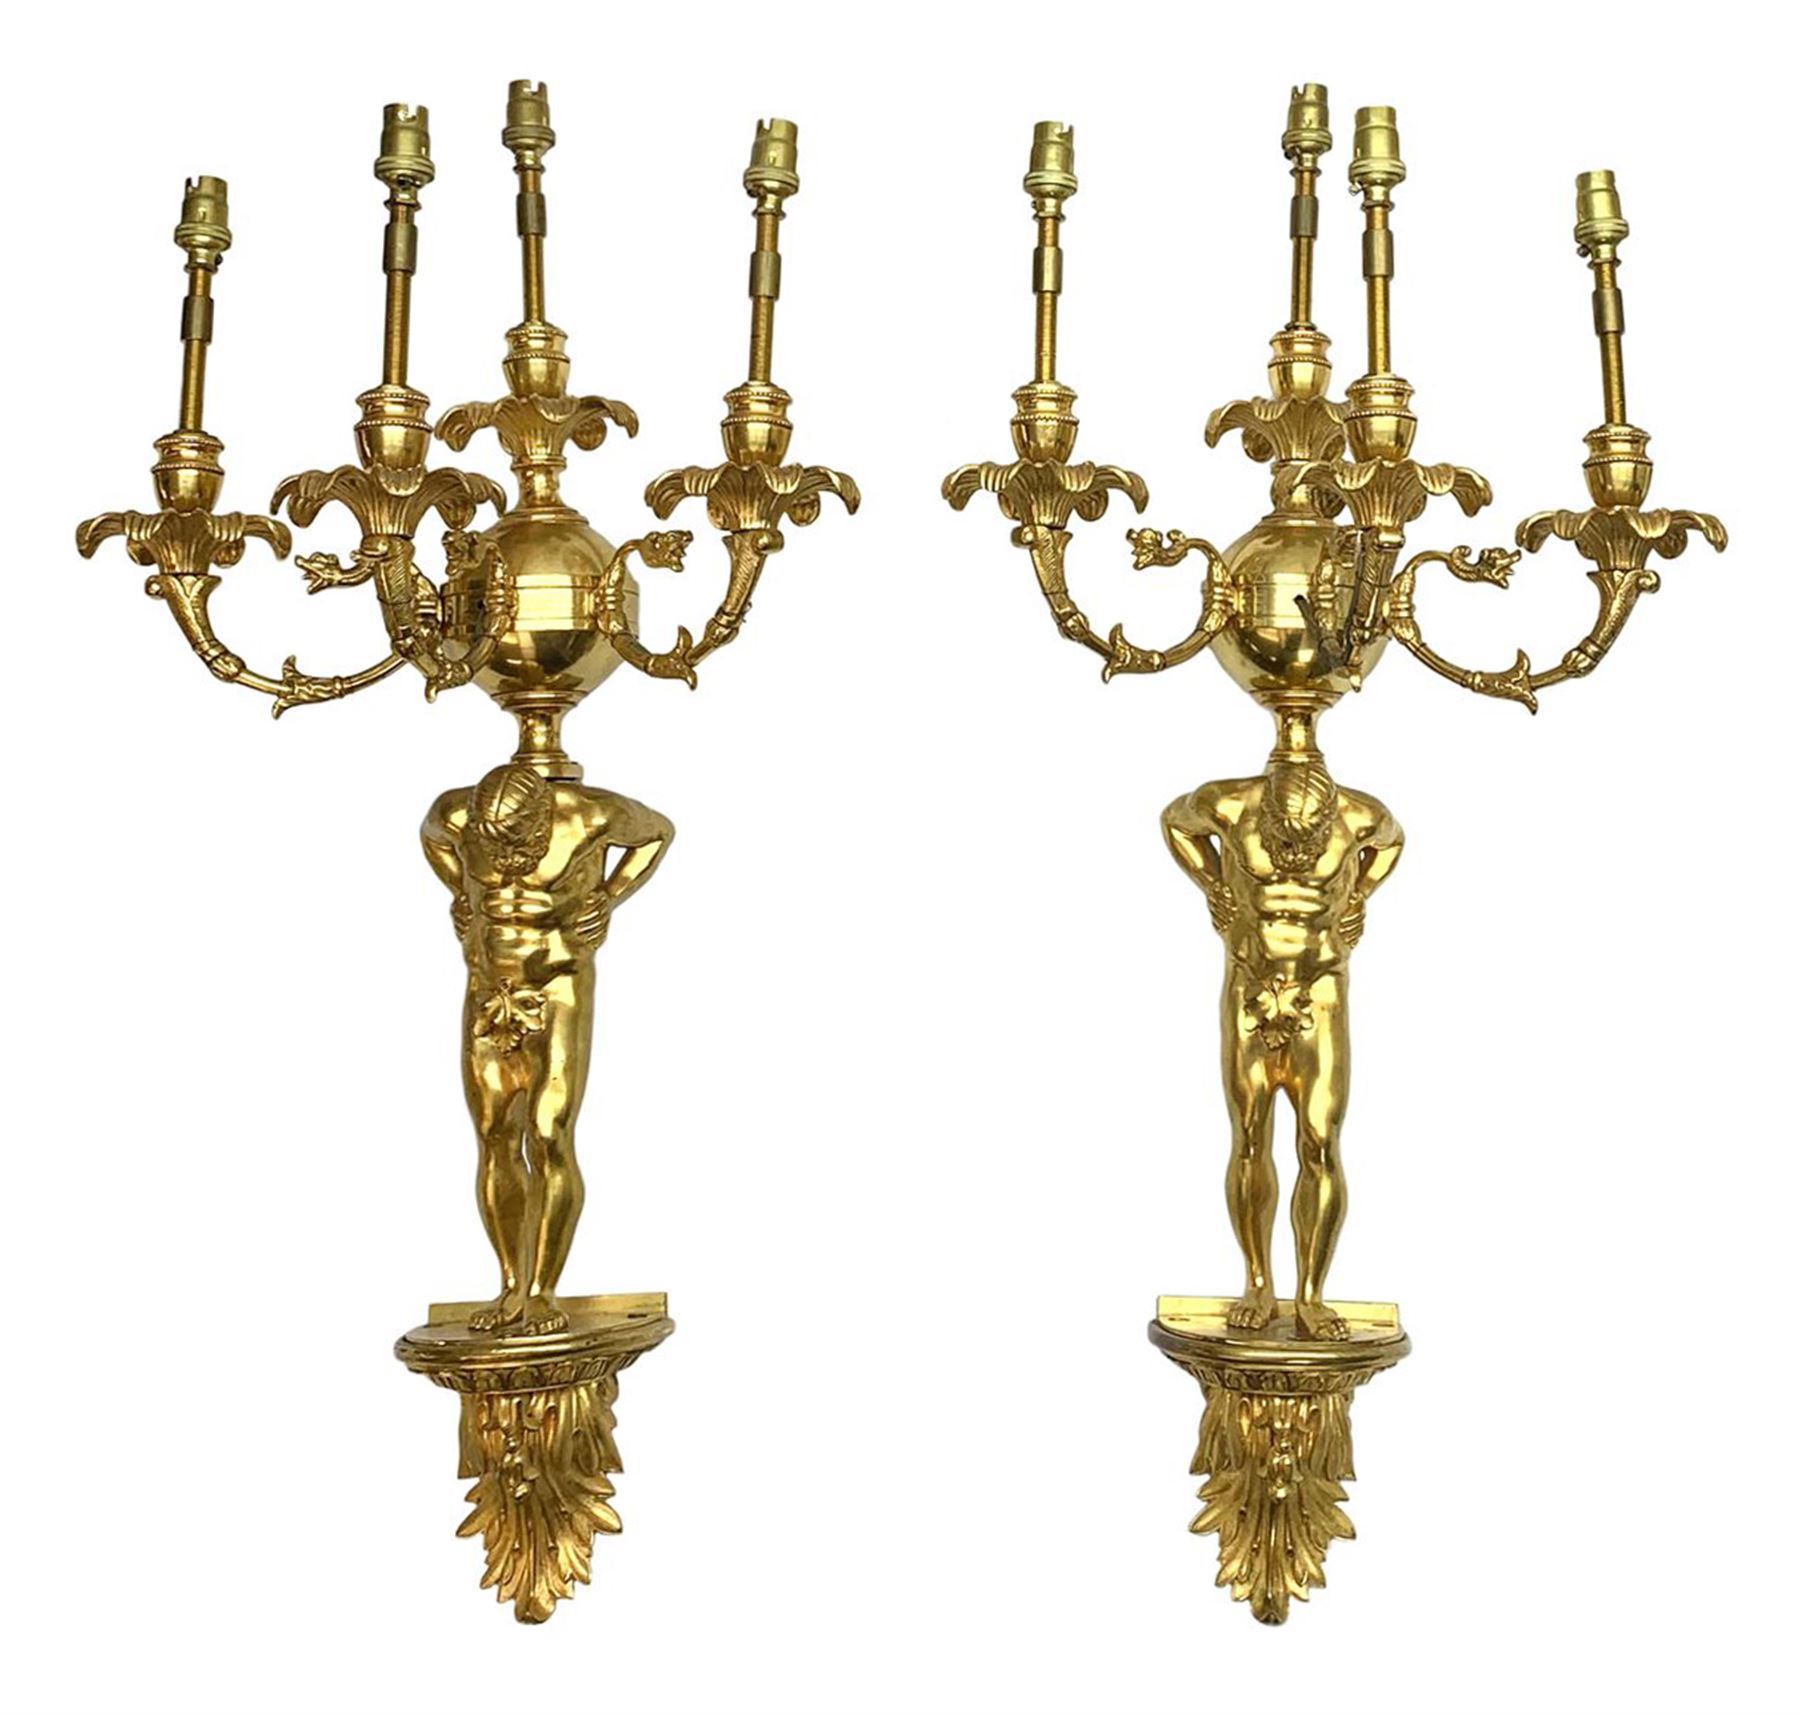 Pair of 19th century and later ormolu wall sconces